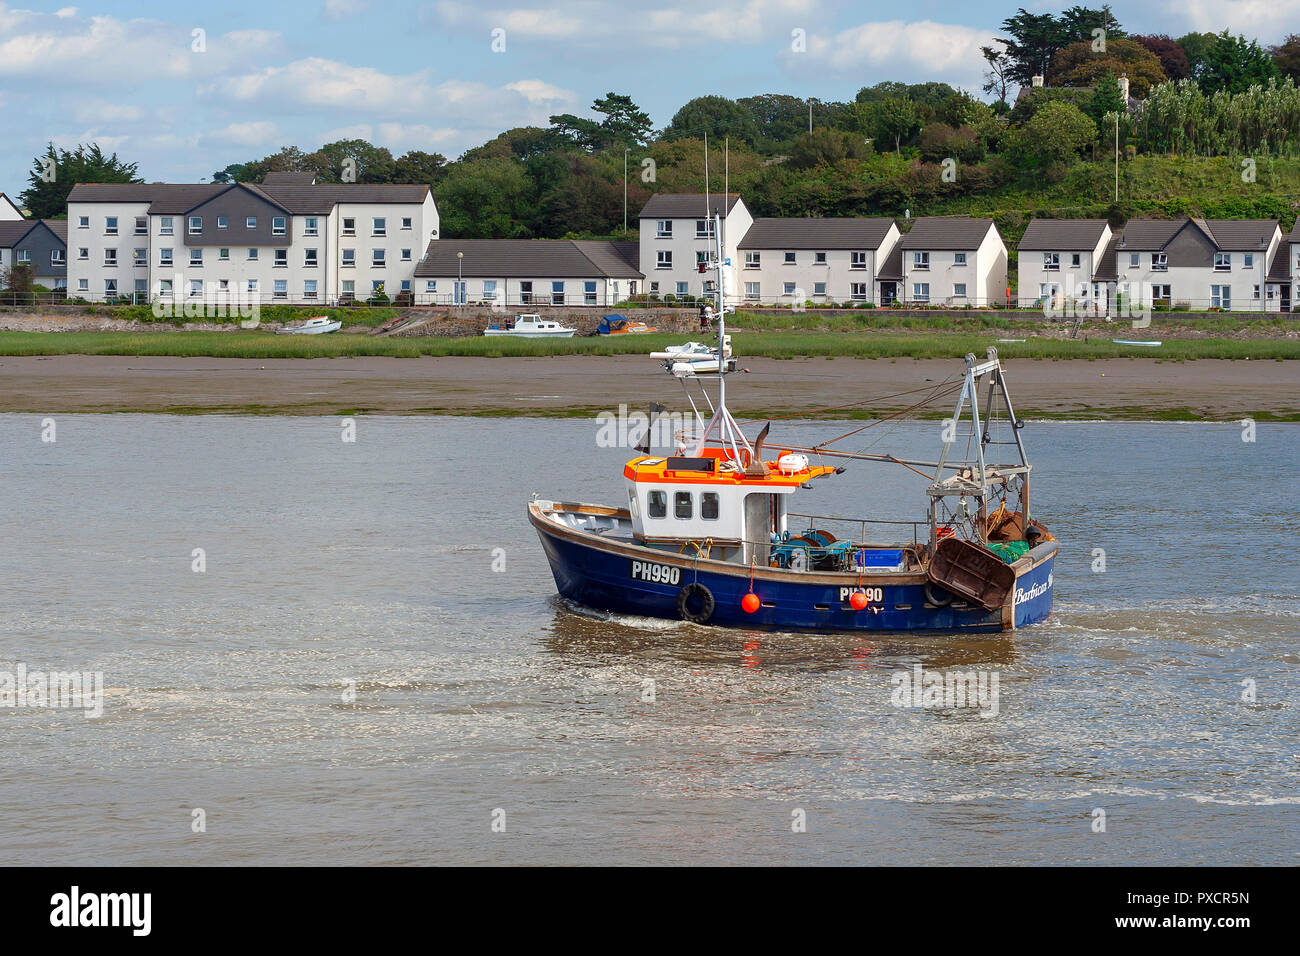 Bideford, Devon, UK - August 26, 2007: Small fishing boat travelling along the river Torridge on a cloudy summer day in Bidford North Devon Stock Photo